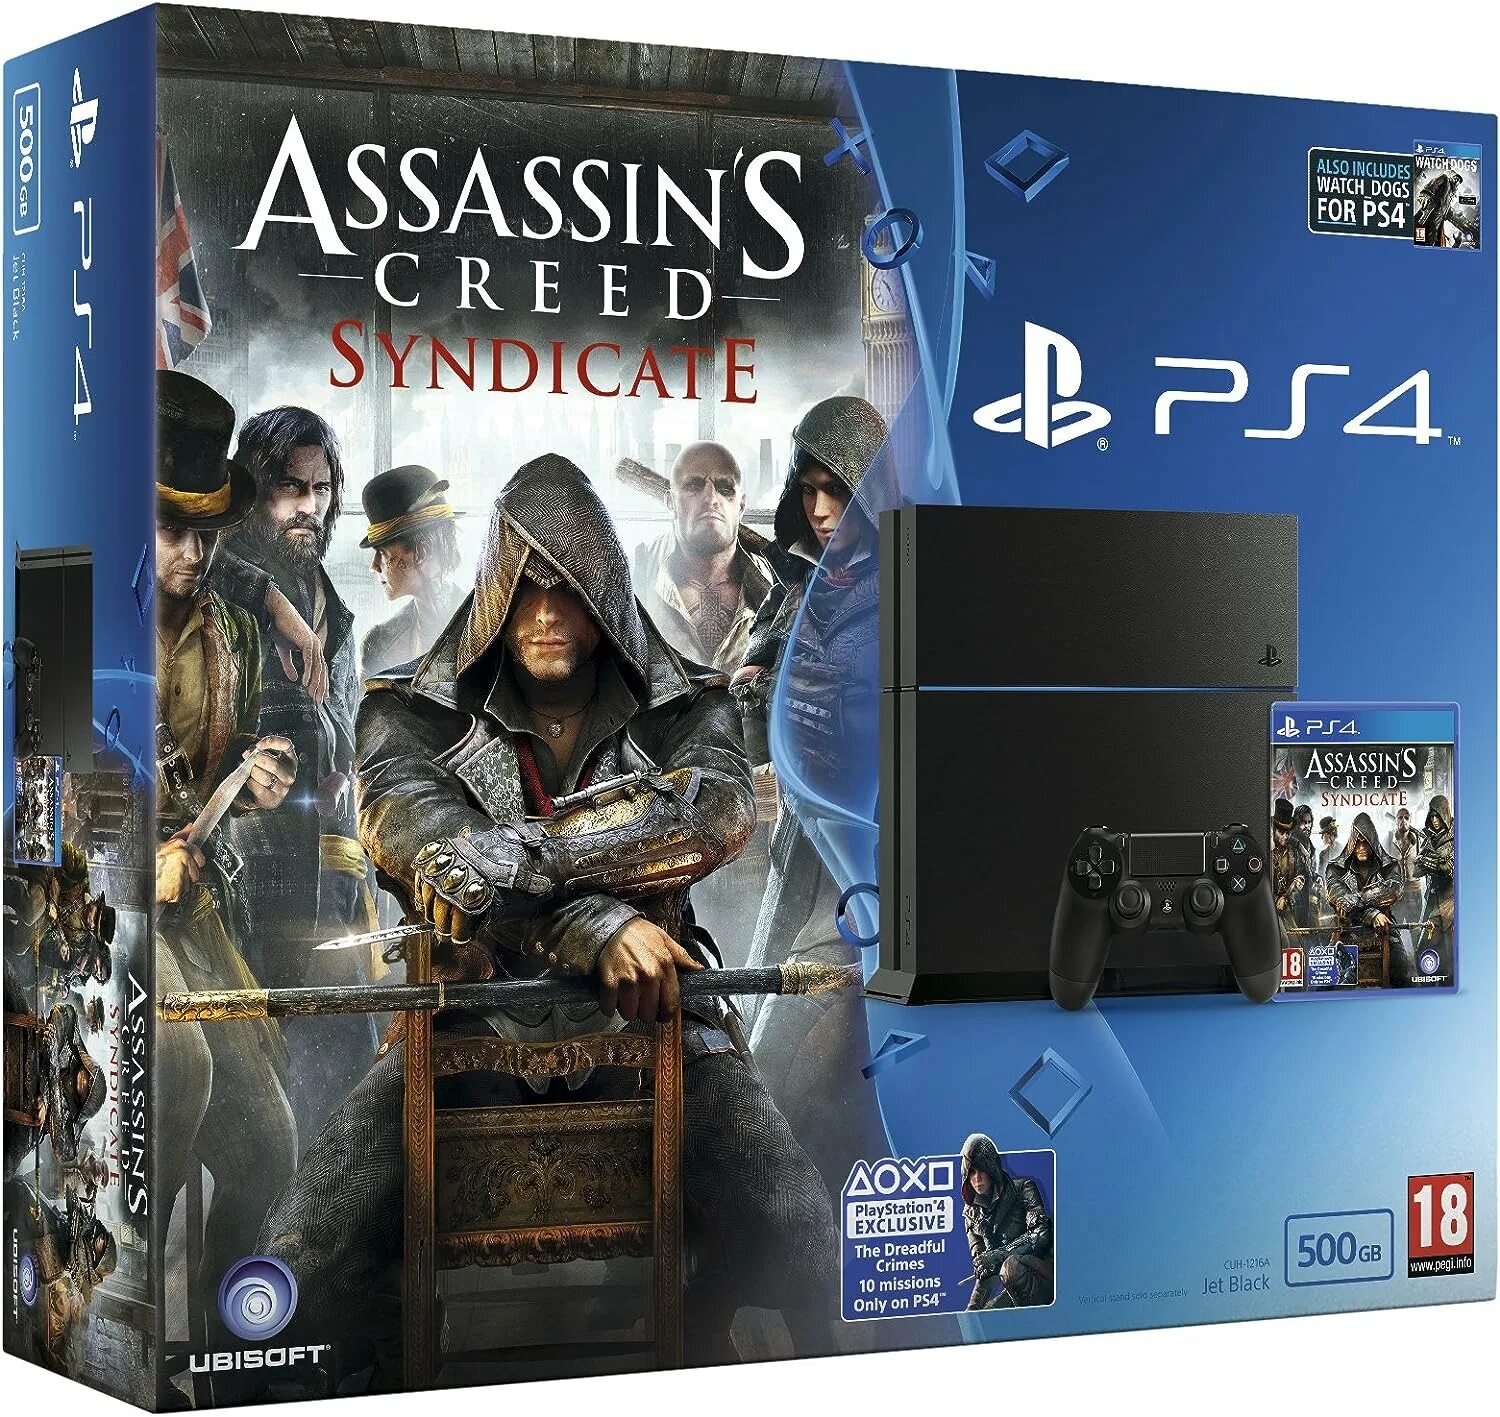 Ps4 диск Assassins Creed 1. PLAYSTATION 4 диски ассасин 2. Ассасин Крид Синдикат диск ПС 4. Assassin's Creed Синдикат ps4 диск. Ps4 скидки